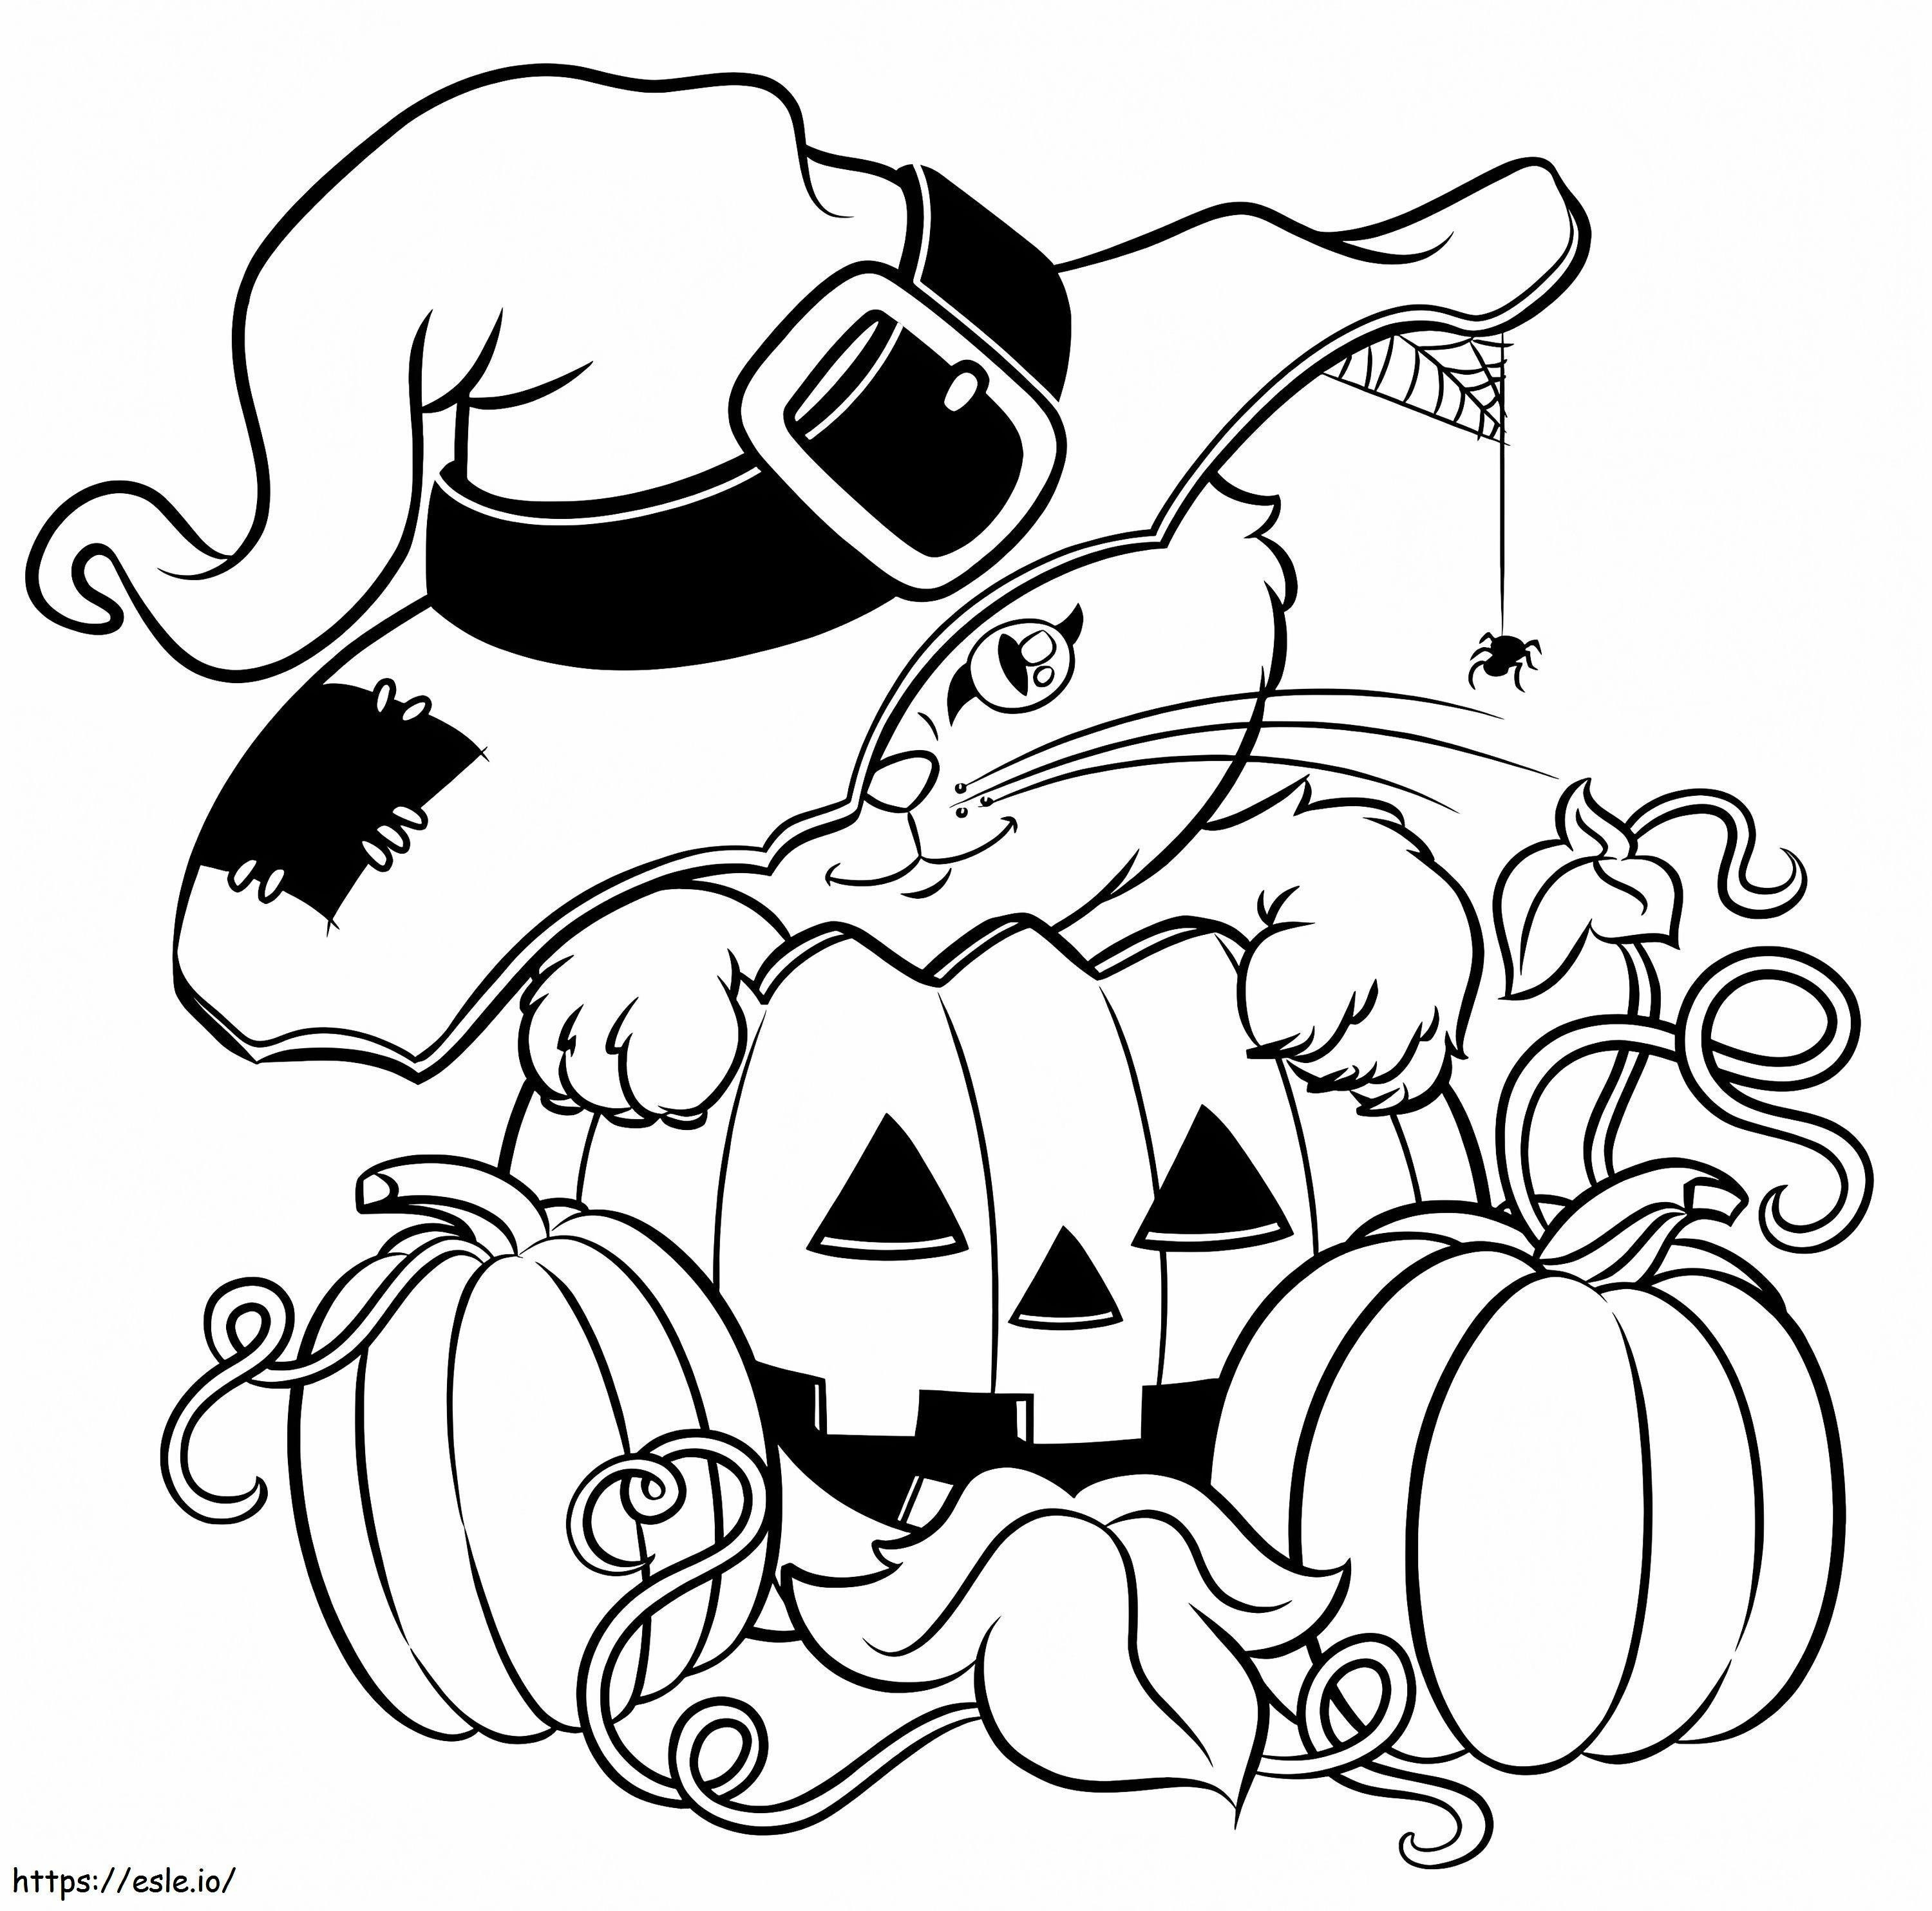 1532663756 Cat Halloween A4 coloring page